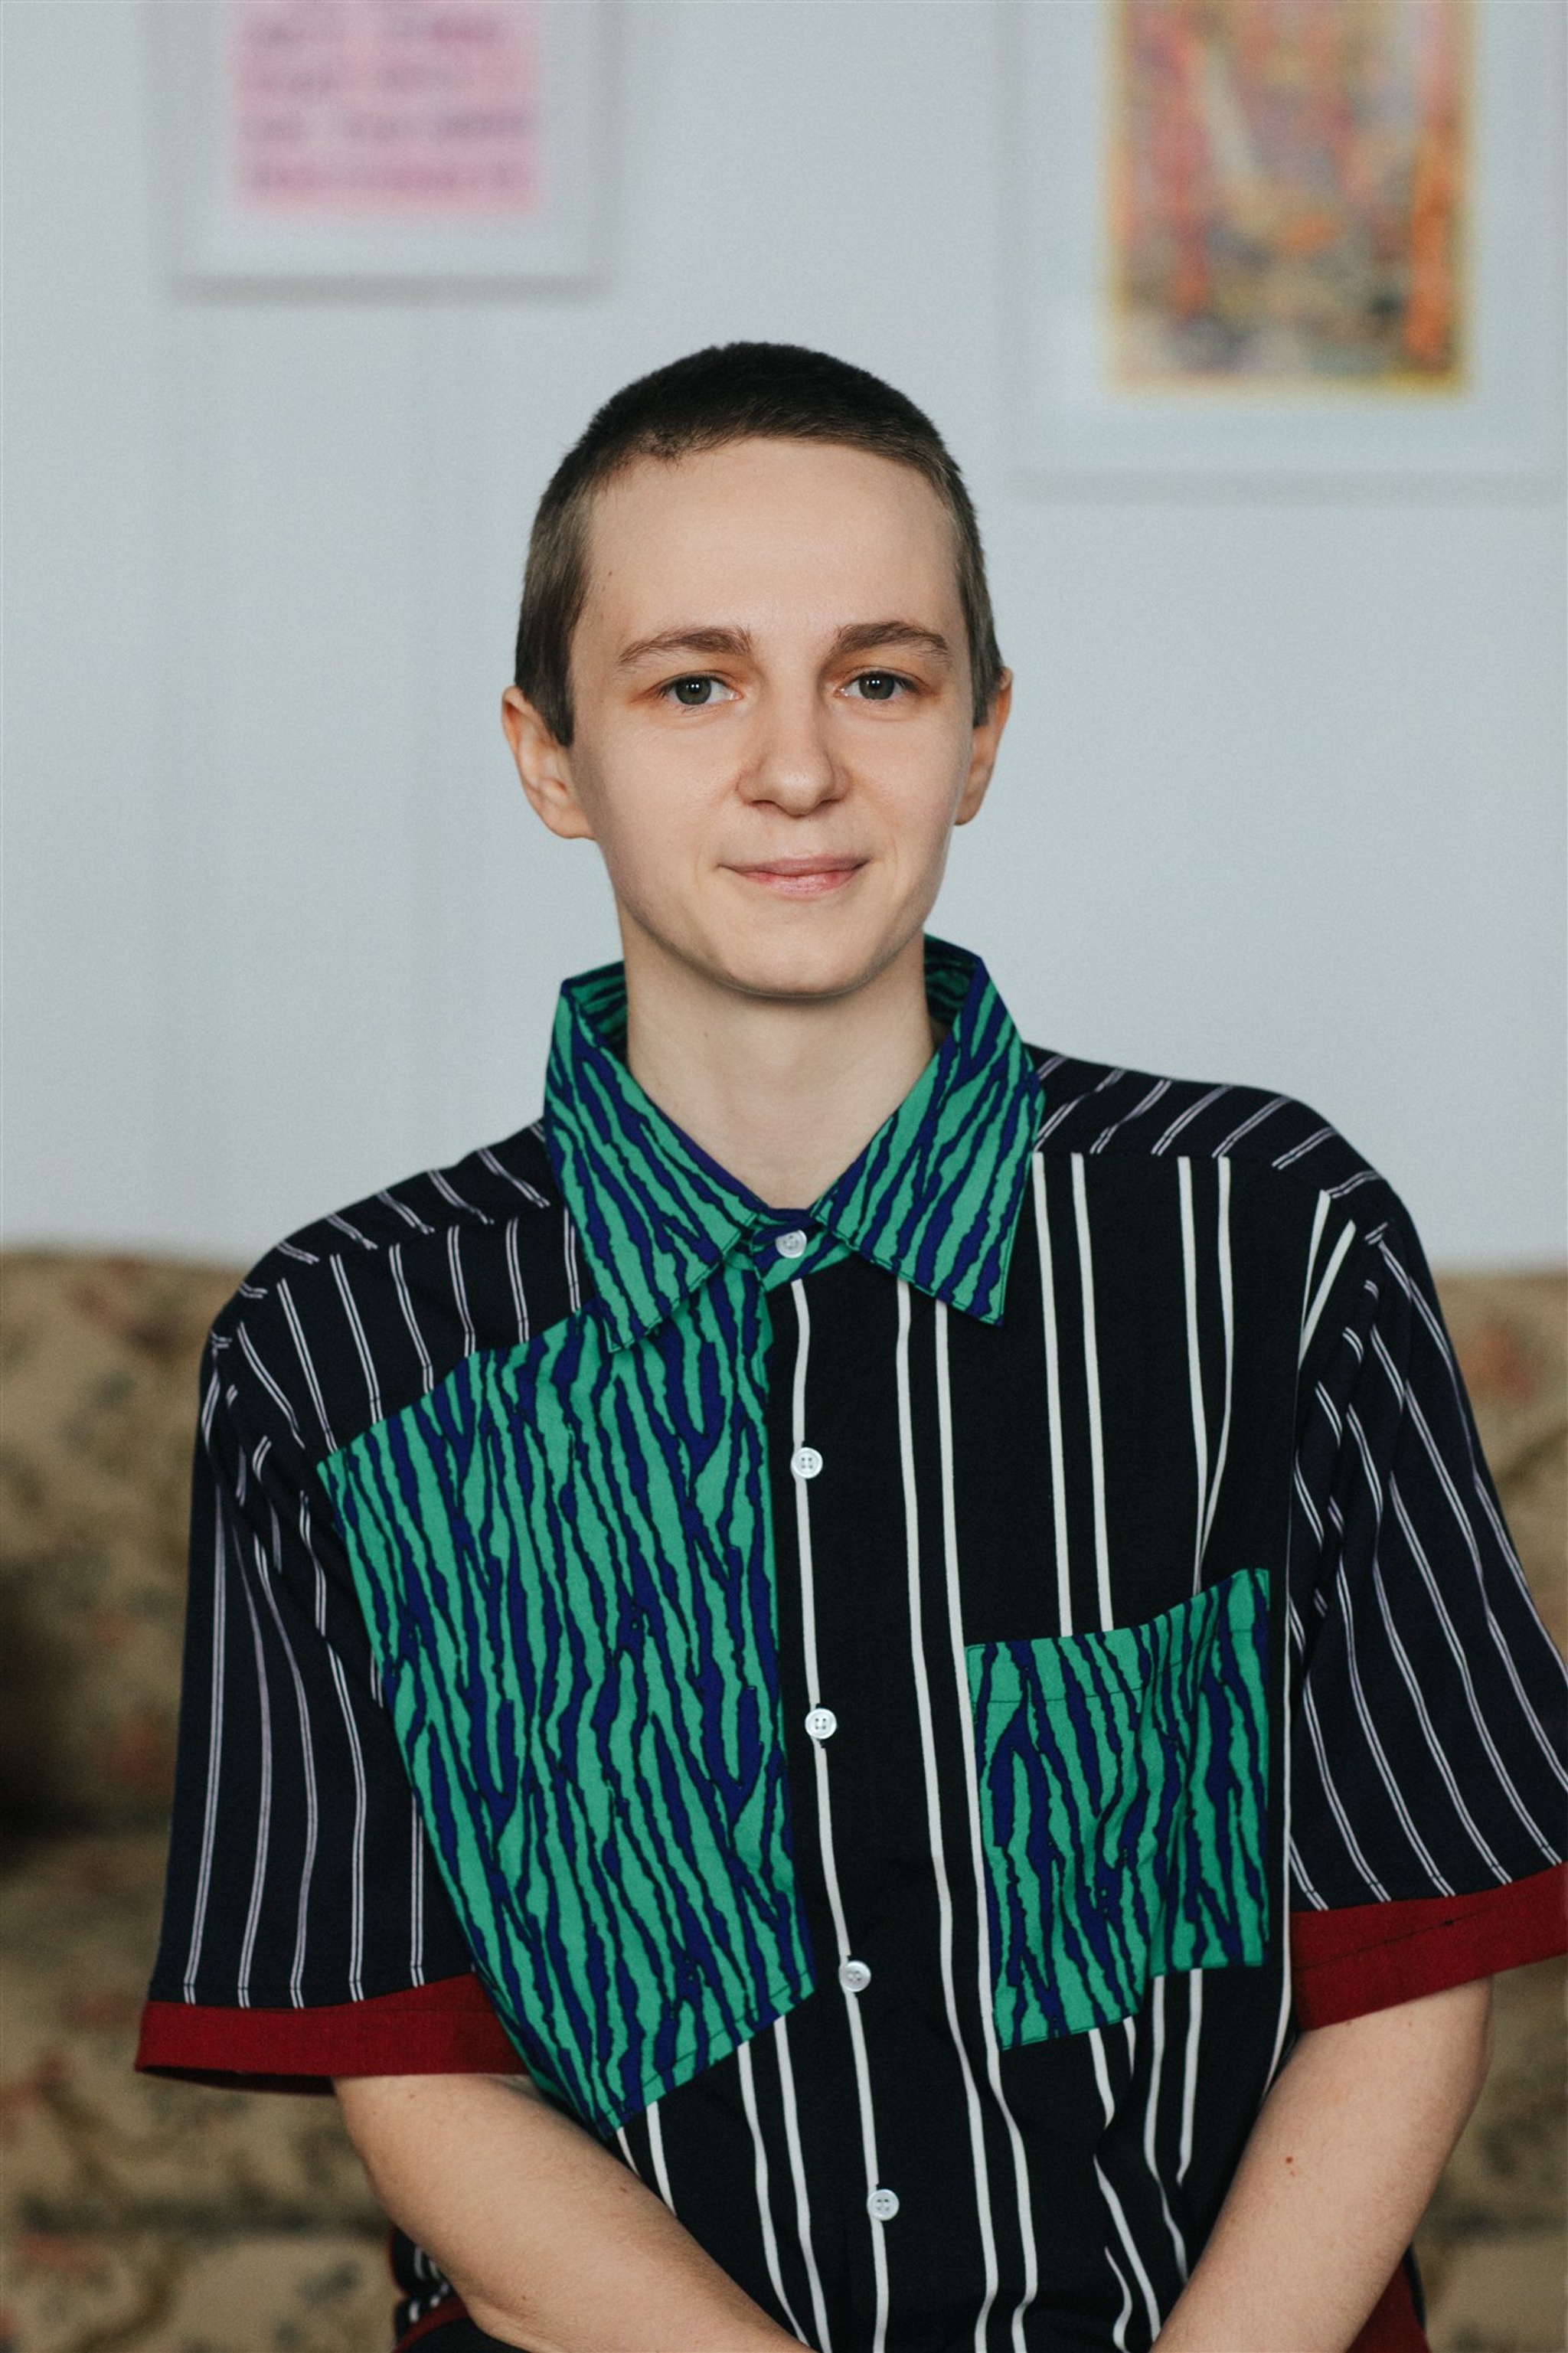 A portrait of Finnegan Shannon, a white person with short cropped hair who wears a multi-patterned green and blue short sleeve shirt. Behind them hang small artworks on a white wall.